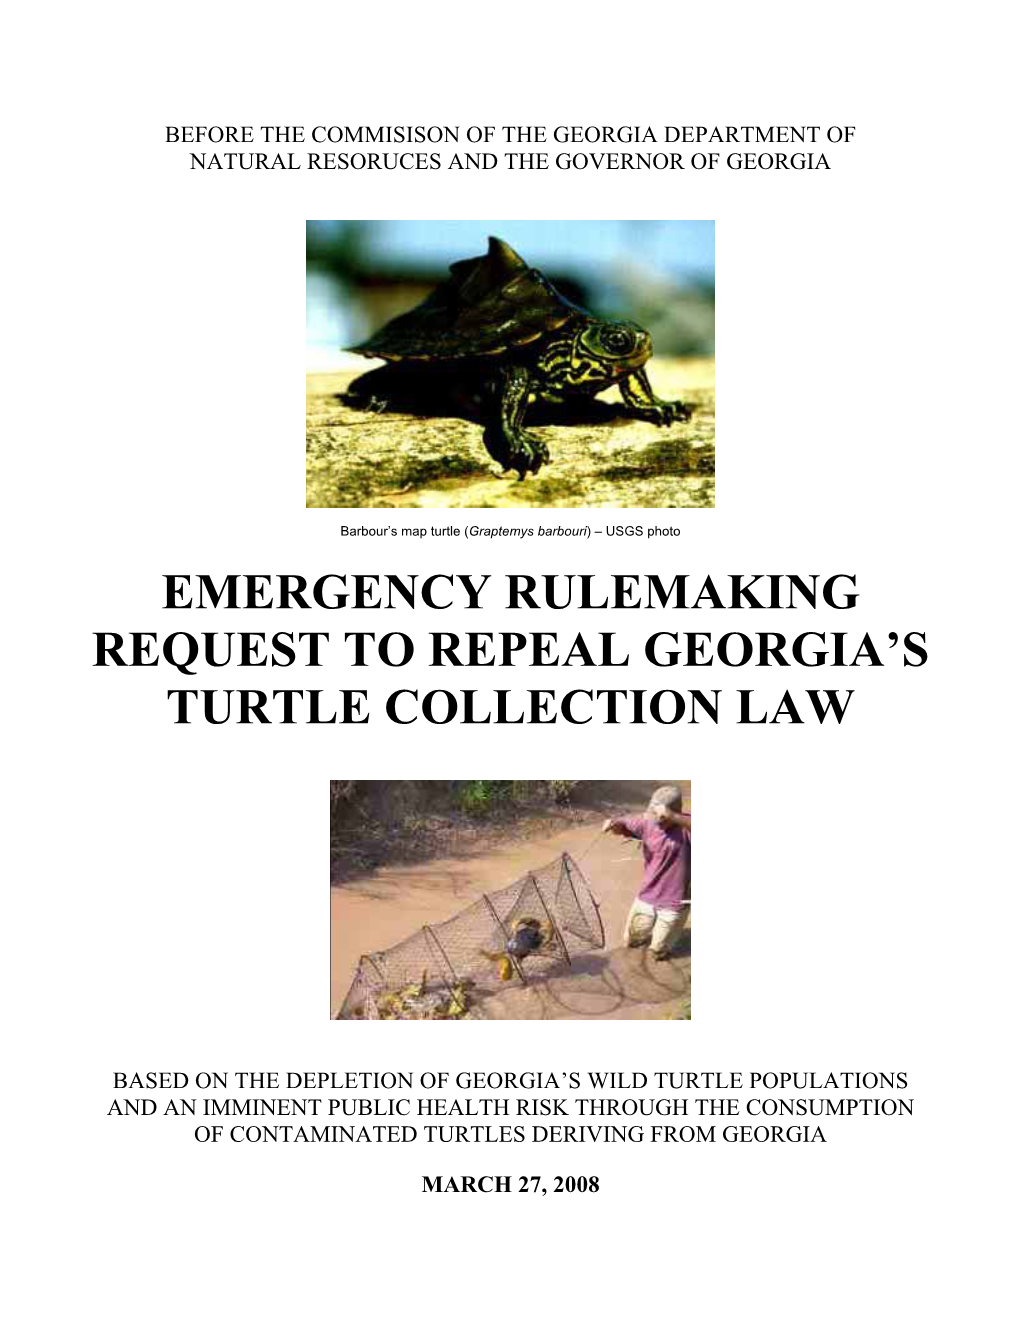 Emergency Rulemaking Request to Repeal Georgia's Turtle Collection